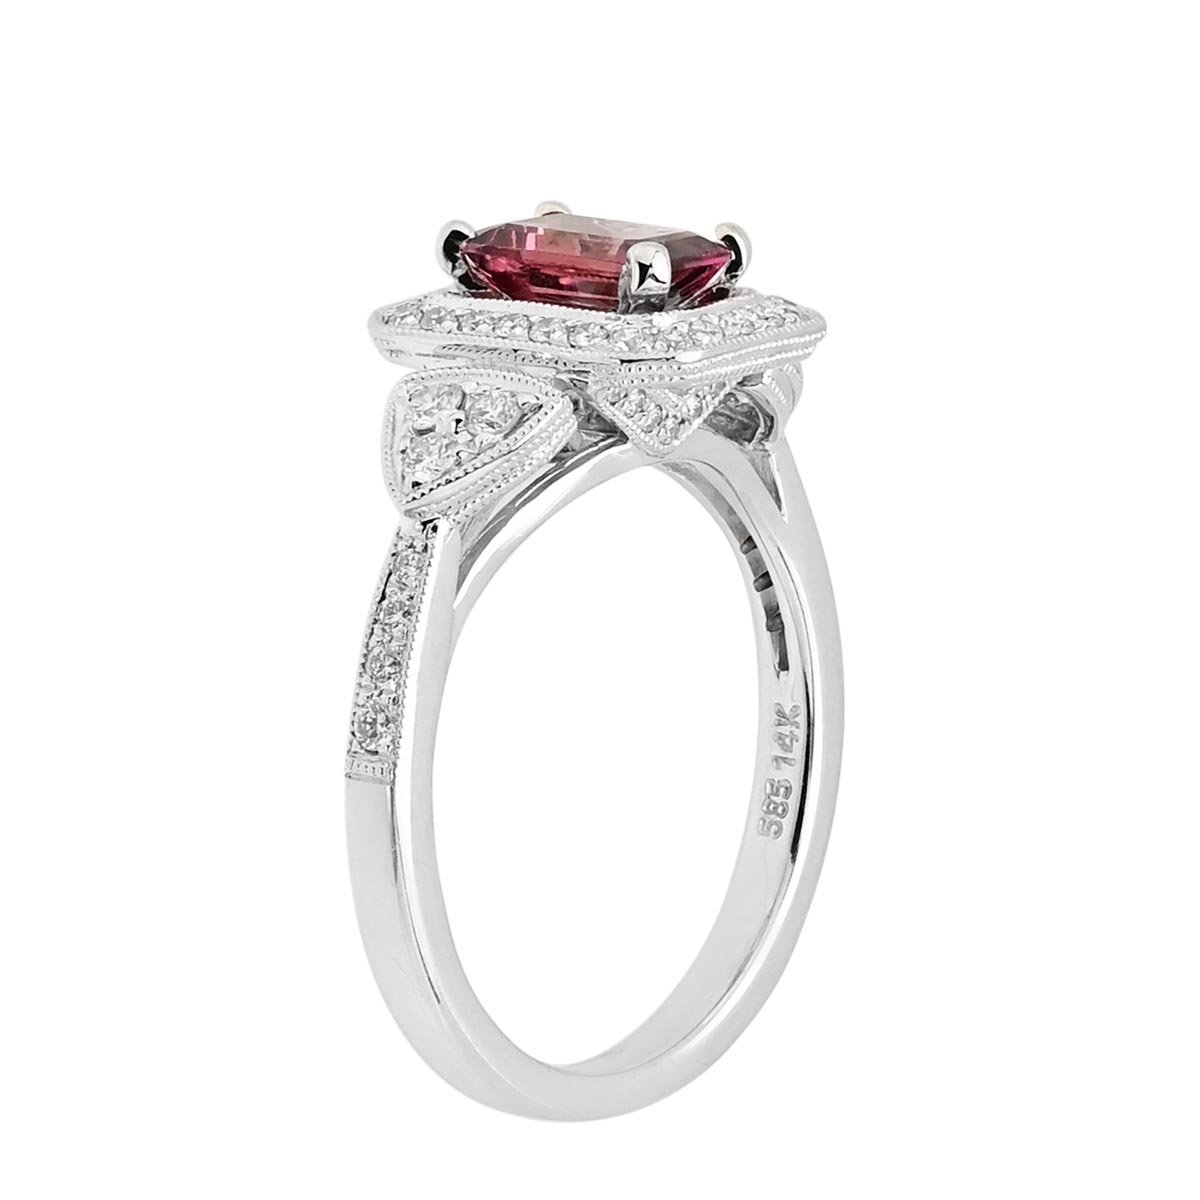 Maine Pink Tourmaline Ring in 14kt White Gold with Diamonds (3/8ct tw)